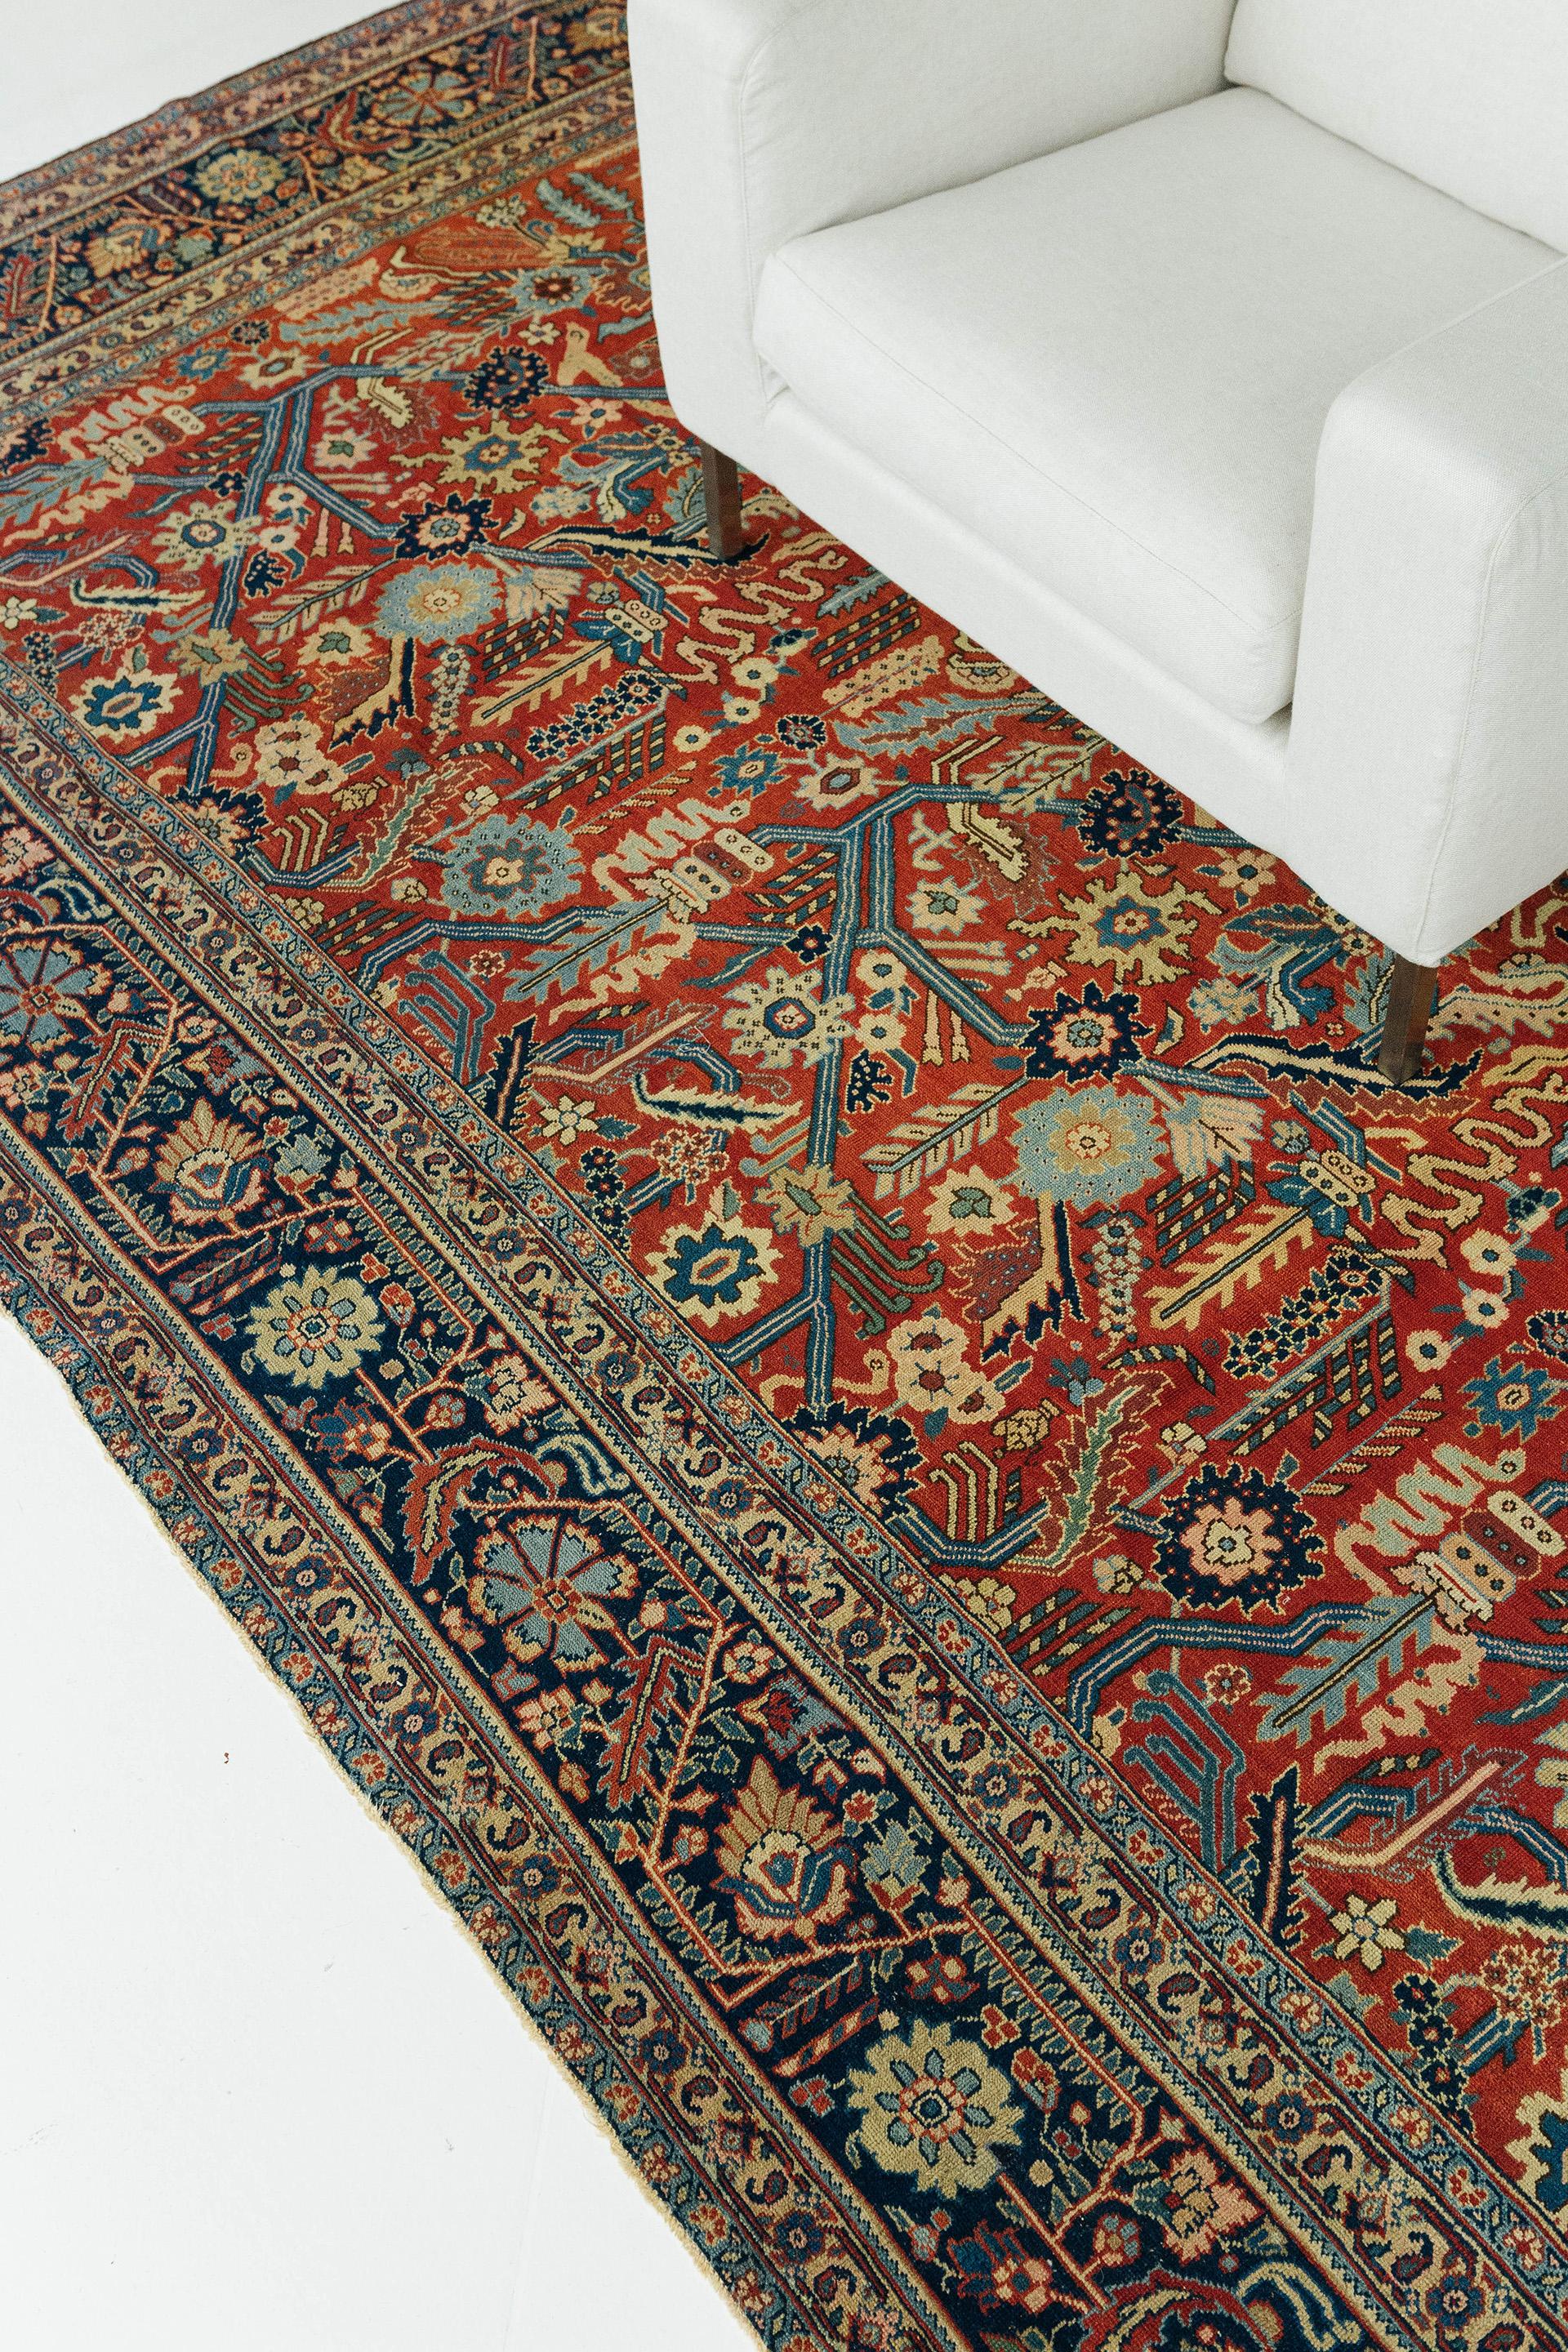 Antique Tabriz with all-over repeat, featuring a frenetic design of intertwined motifs including angular vines, palmettes, serrated leaves, rosettes, and snakes. Strong vibrant colors include cherry red field ground, dark blue border, and motif